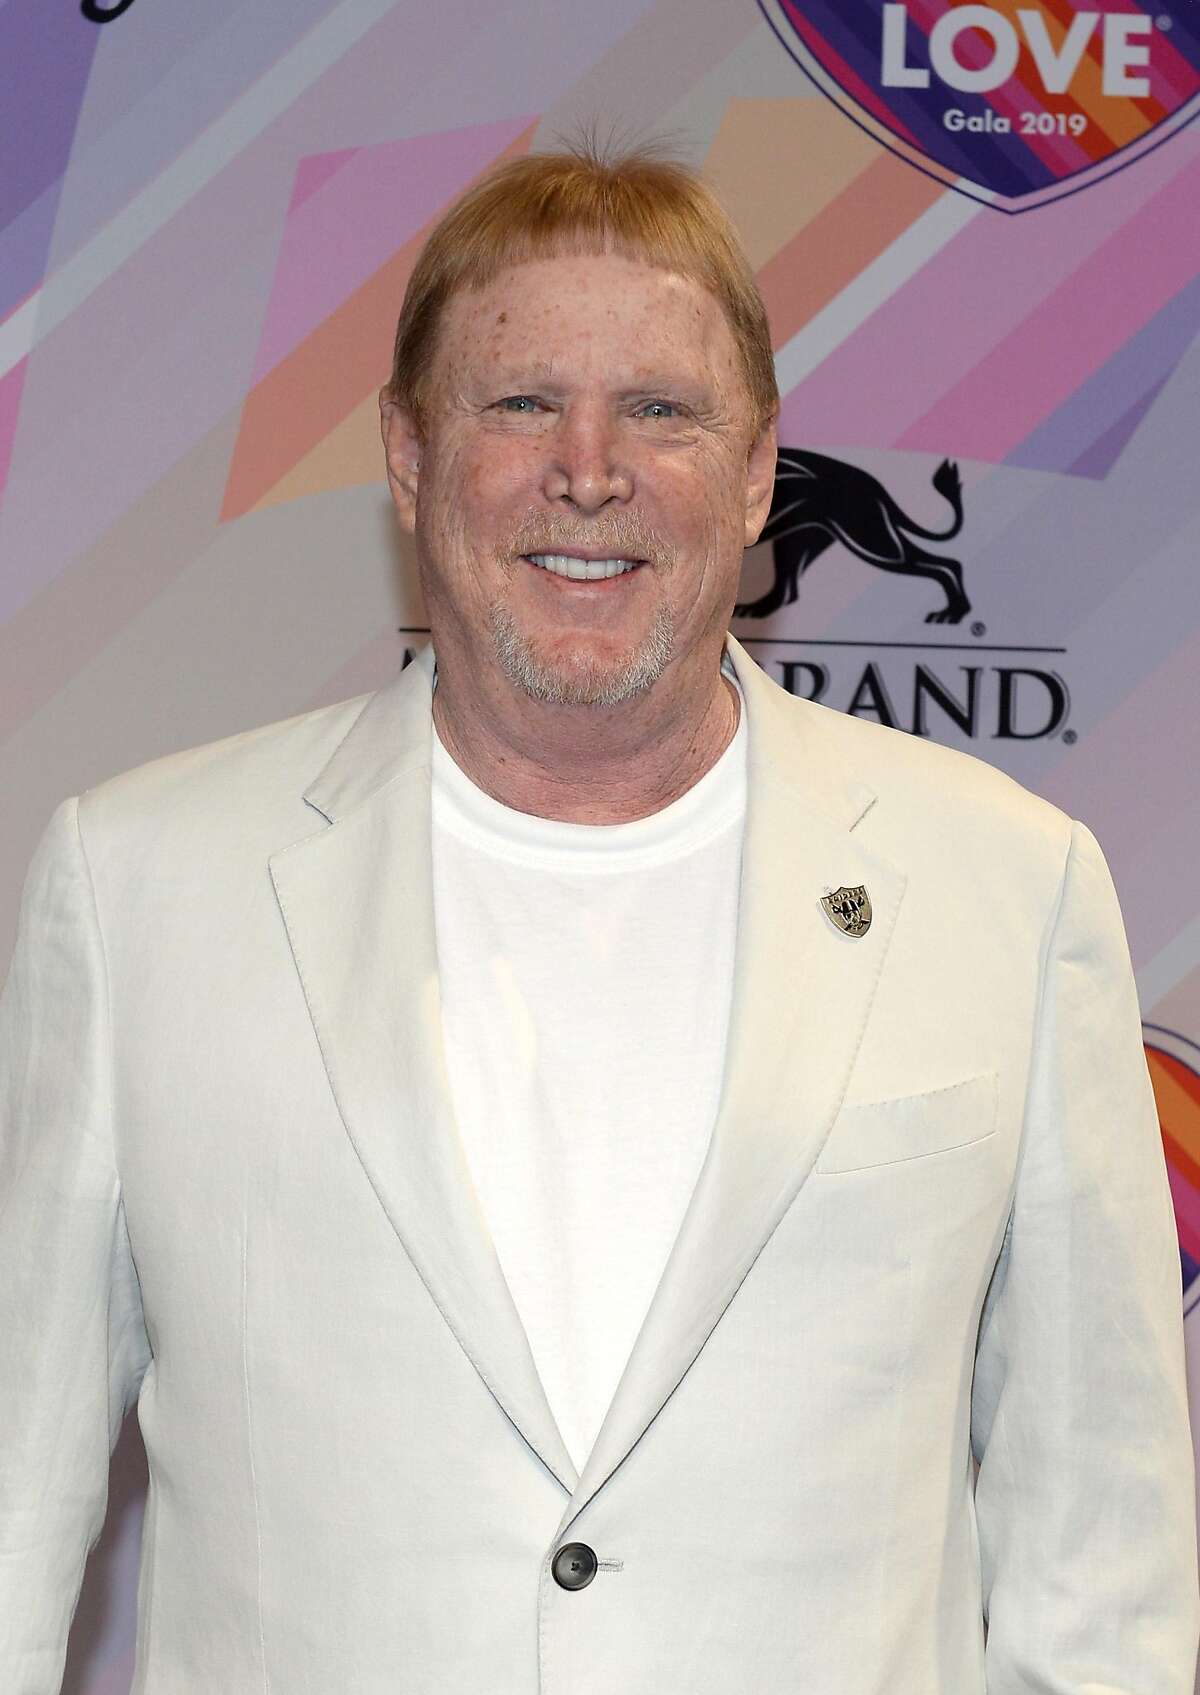 LAS VEGAS, NEVADA - MARCH 16: Mark Davis attends the 23rd annual Keep Memory Alive 'Power of Love Gala' benefit for the Cleveland Clinic Lou Ruvo Center for Brain Health at MGM Grand Garden Arena on March 16, 2019 in Las Vegas, Nevada. (Photo by Bryan Steffy/Getty Images for Keep Memory Alive)